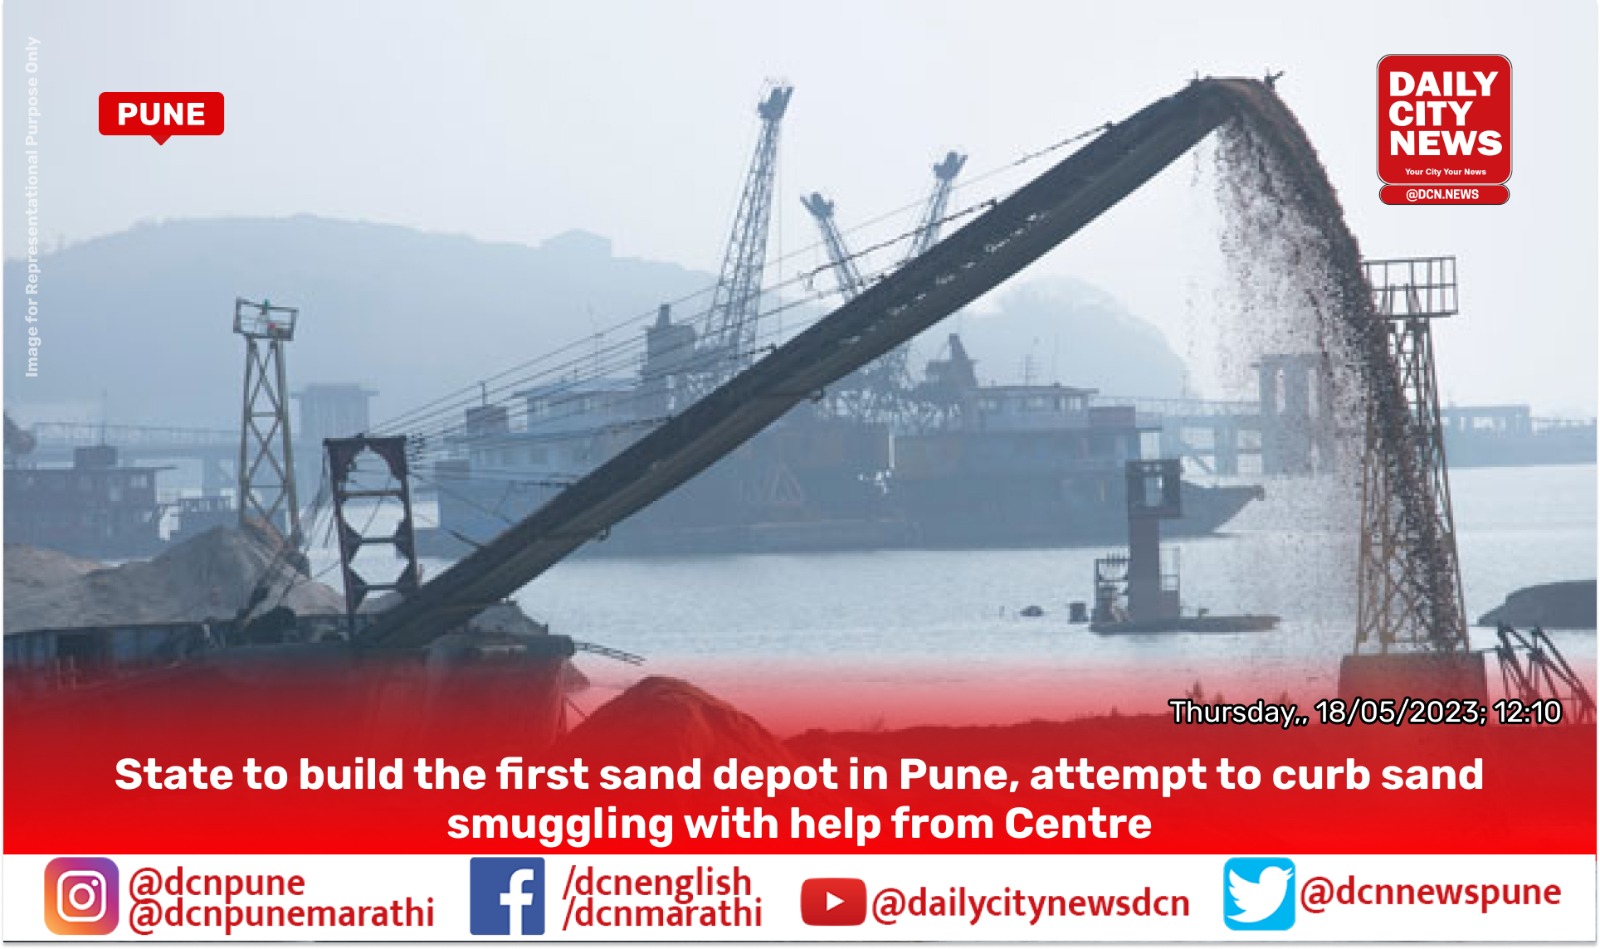 State to build the first sand depot in Pune, attempt to curb sand smuggling with help from Centre